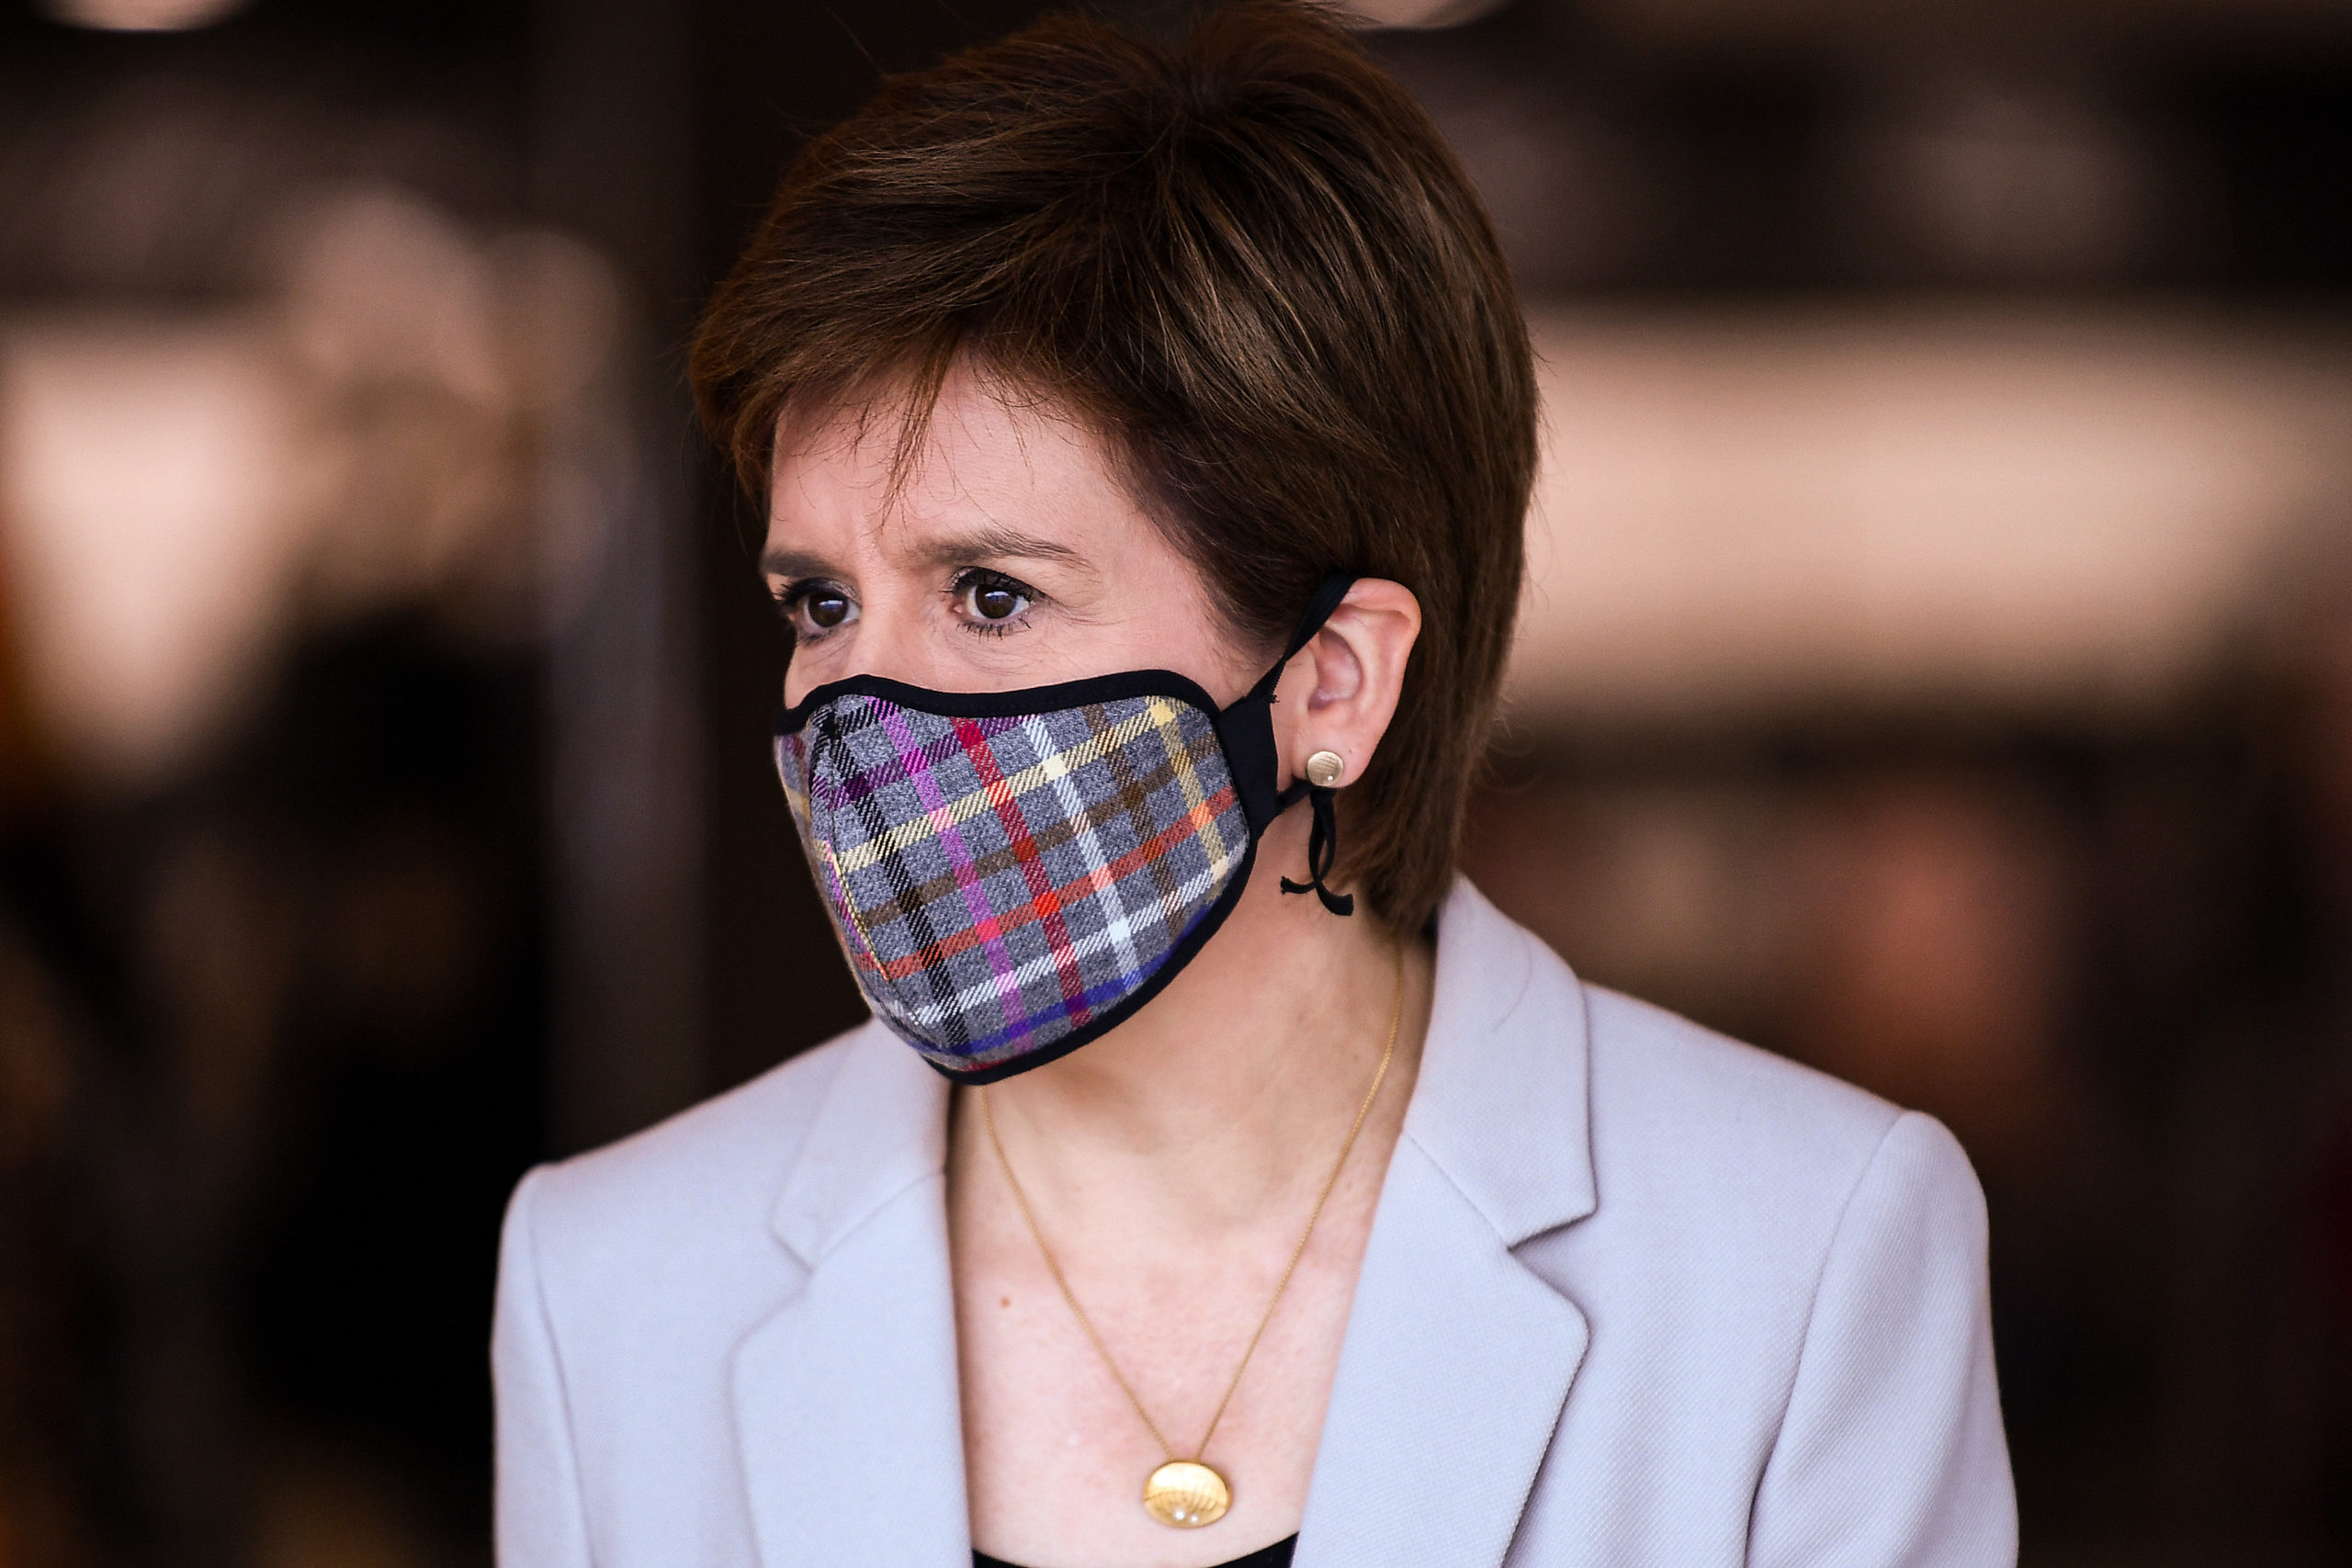 Nicola Sturgeon said she fundamentally disagrees with the immigration policy of the Home Office.